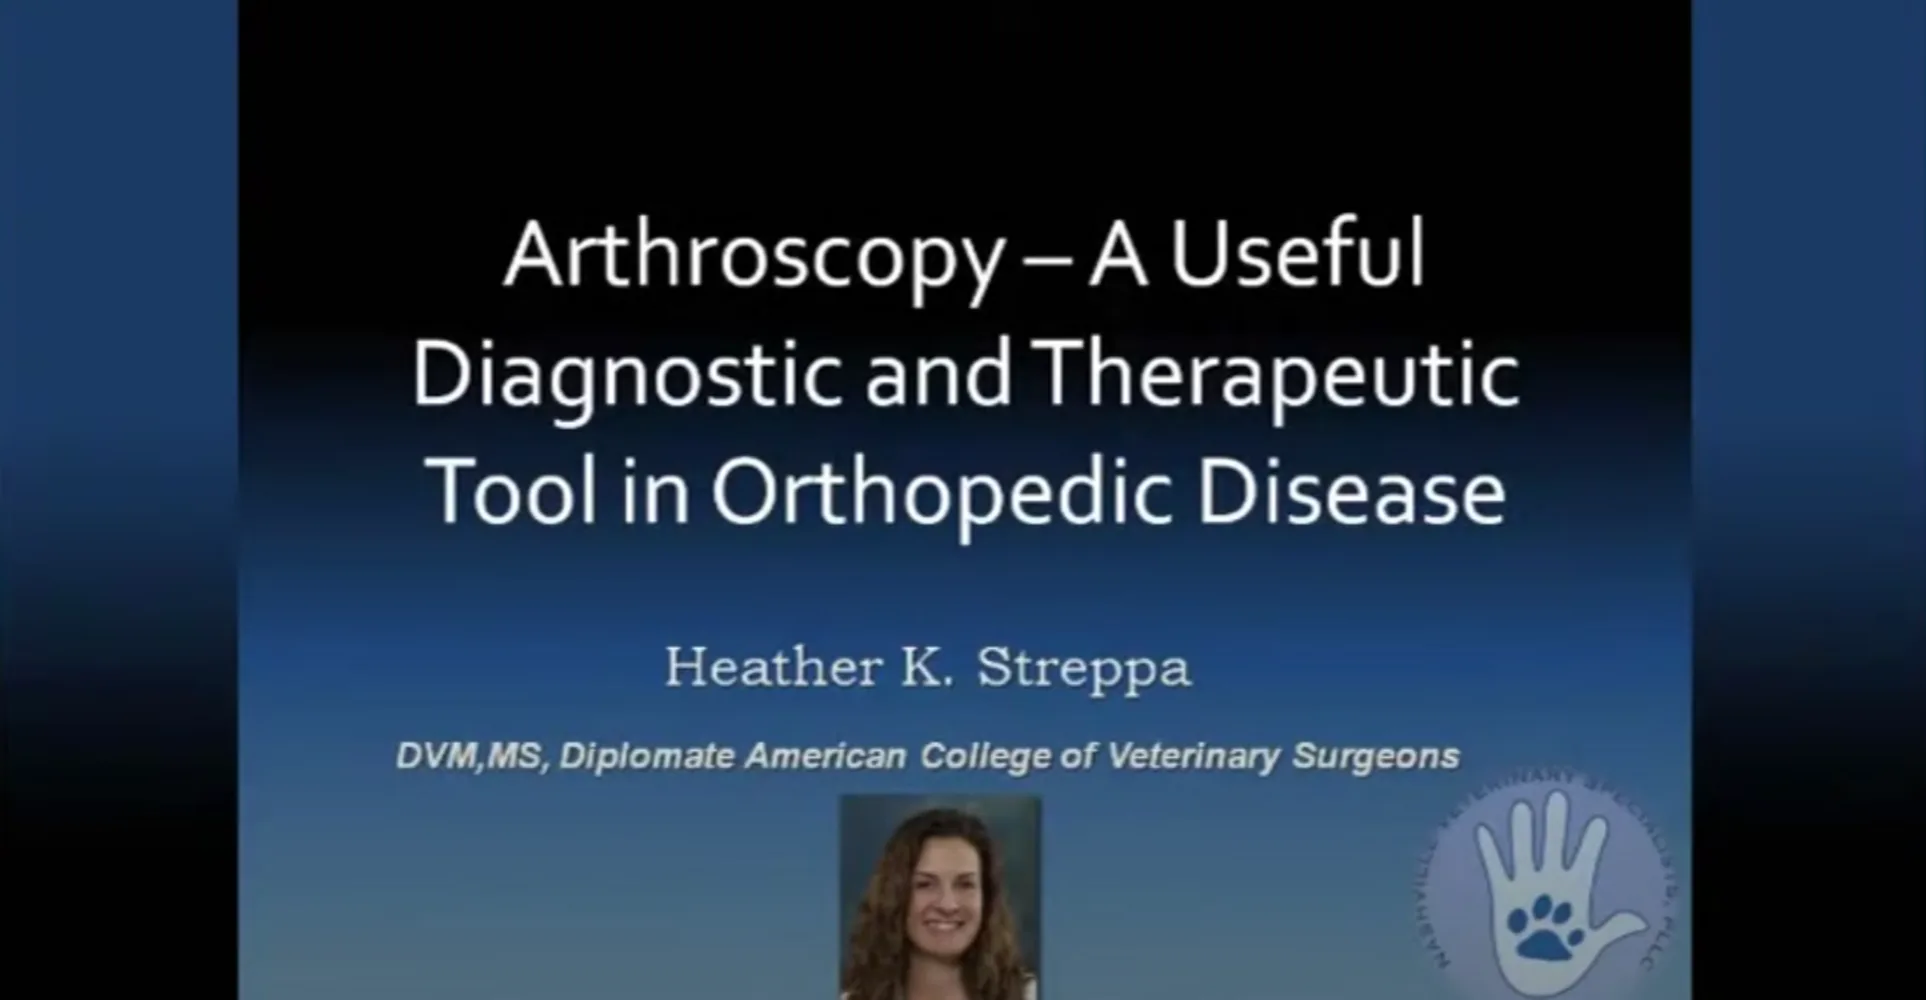 Arthroscopy-A Useful Diagnostic and Therapeutic Tool in Orthopedic Disease Video at NVS